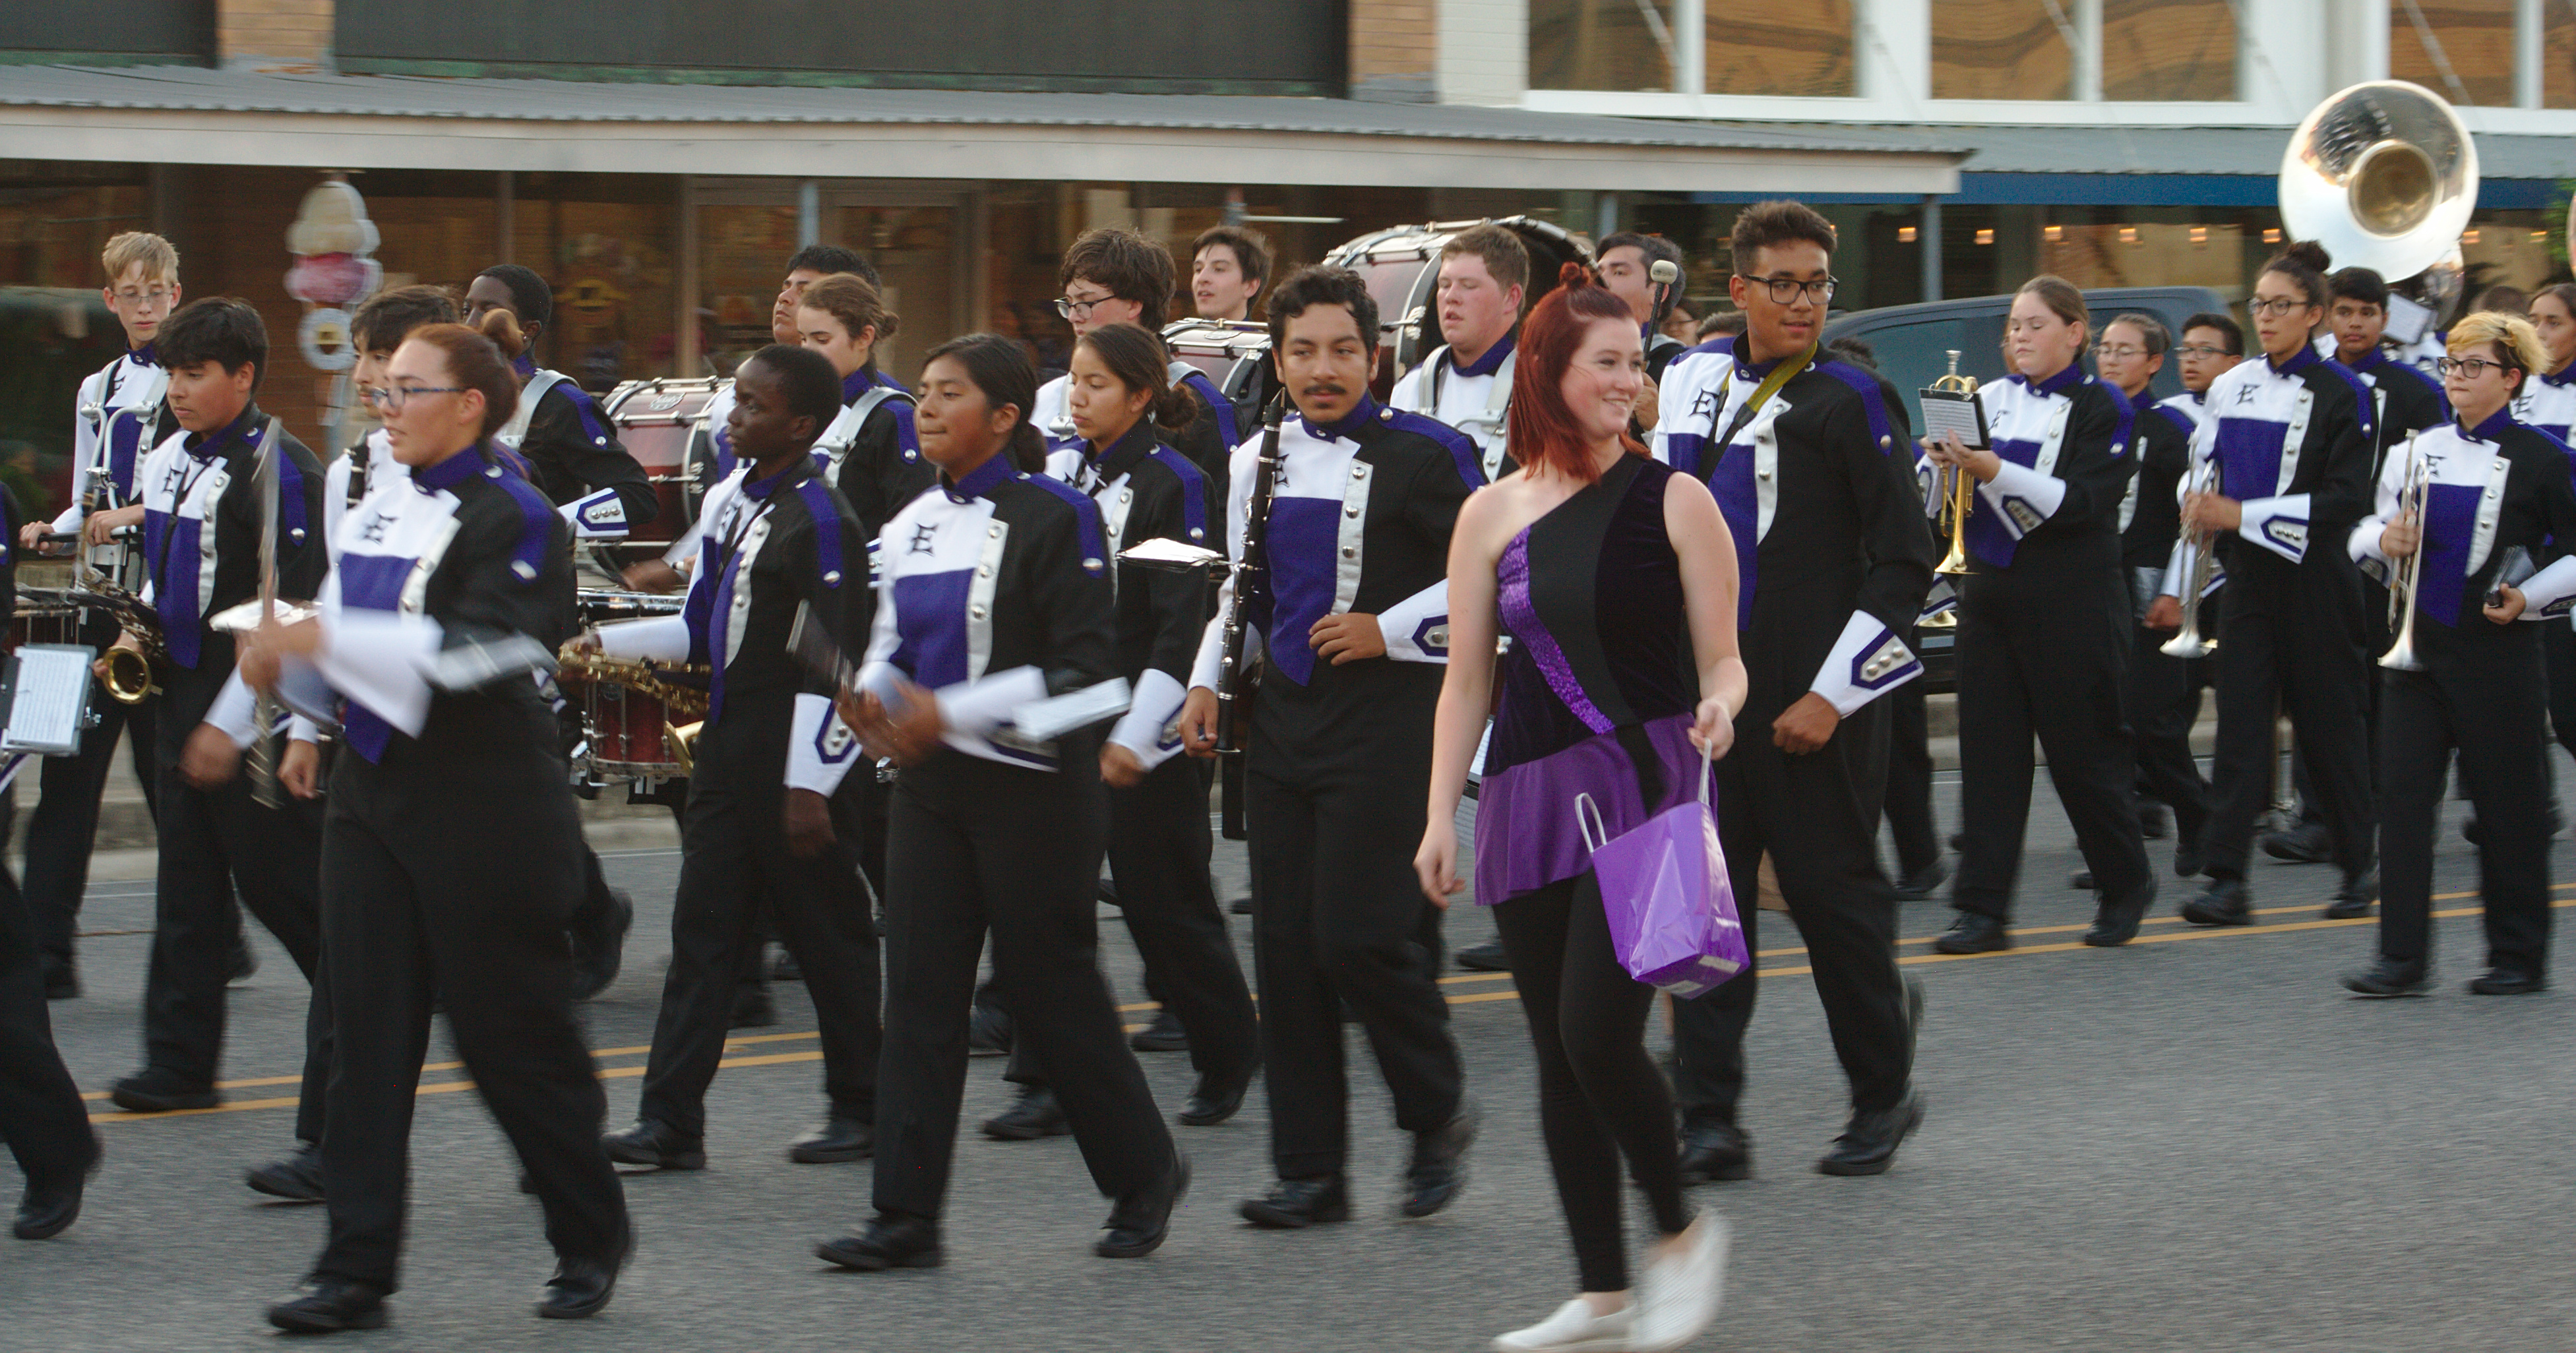 Elgin shows off spirit with parade, pep rally Elgin Courier